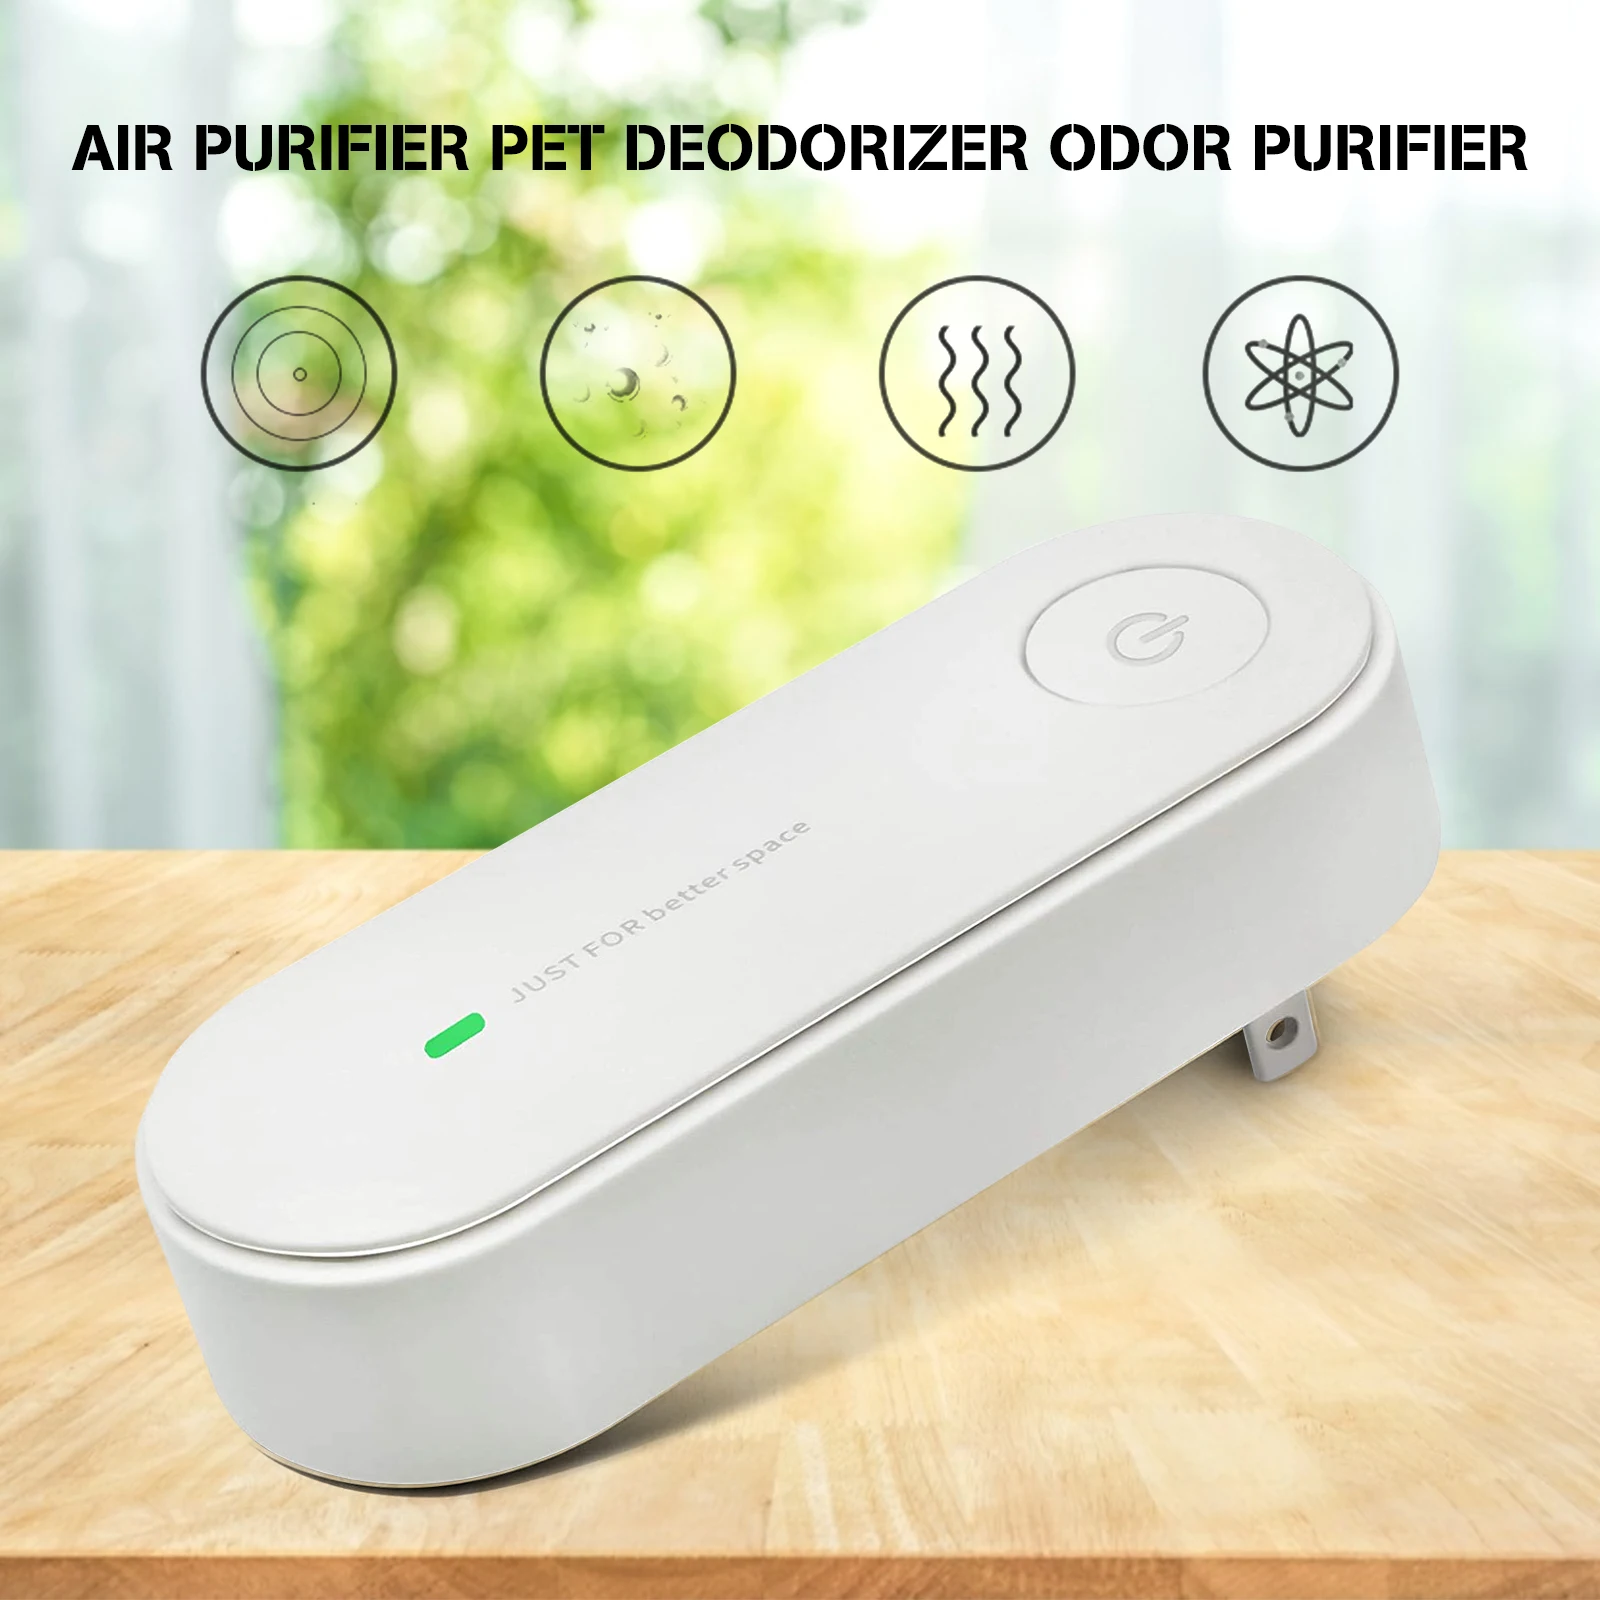 Smart Air Purifier Odor Purifier Pet Deodorizer Kitchen Odor Purifier Smoke Smell Removal Household Products xiaomi mijia negative ion air purifier odor deodorizer durable remove dust smoke removal formaldehyde removal household use